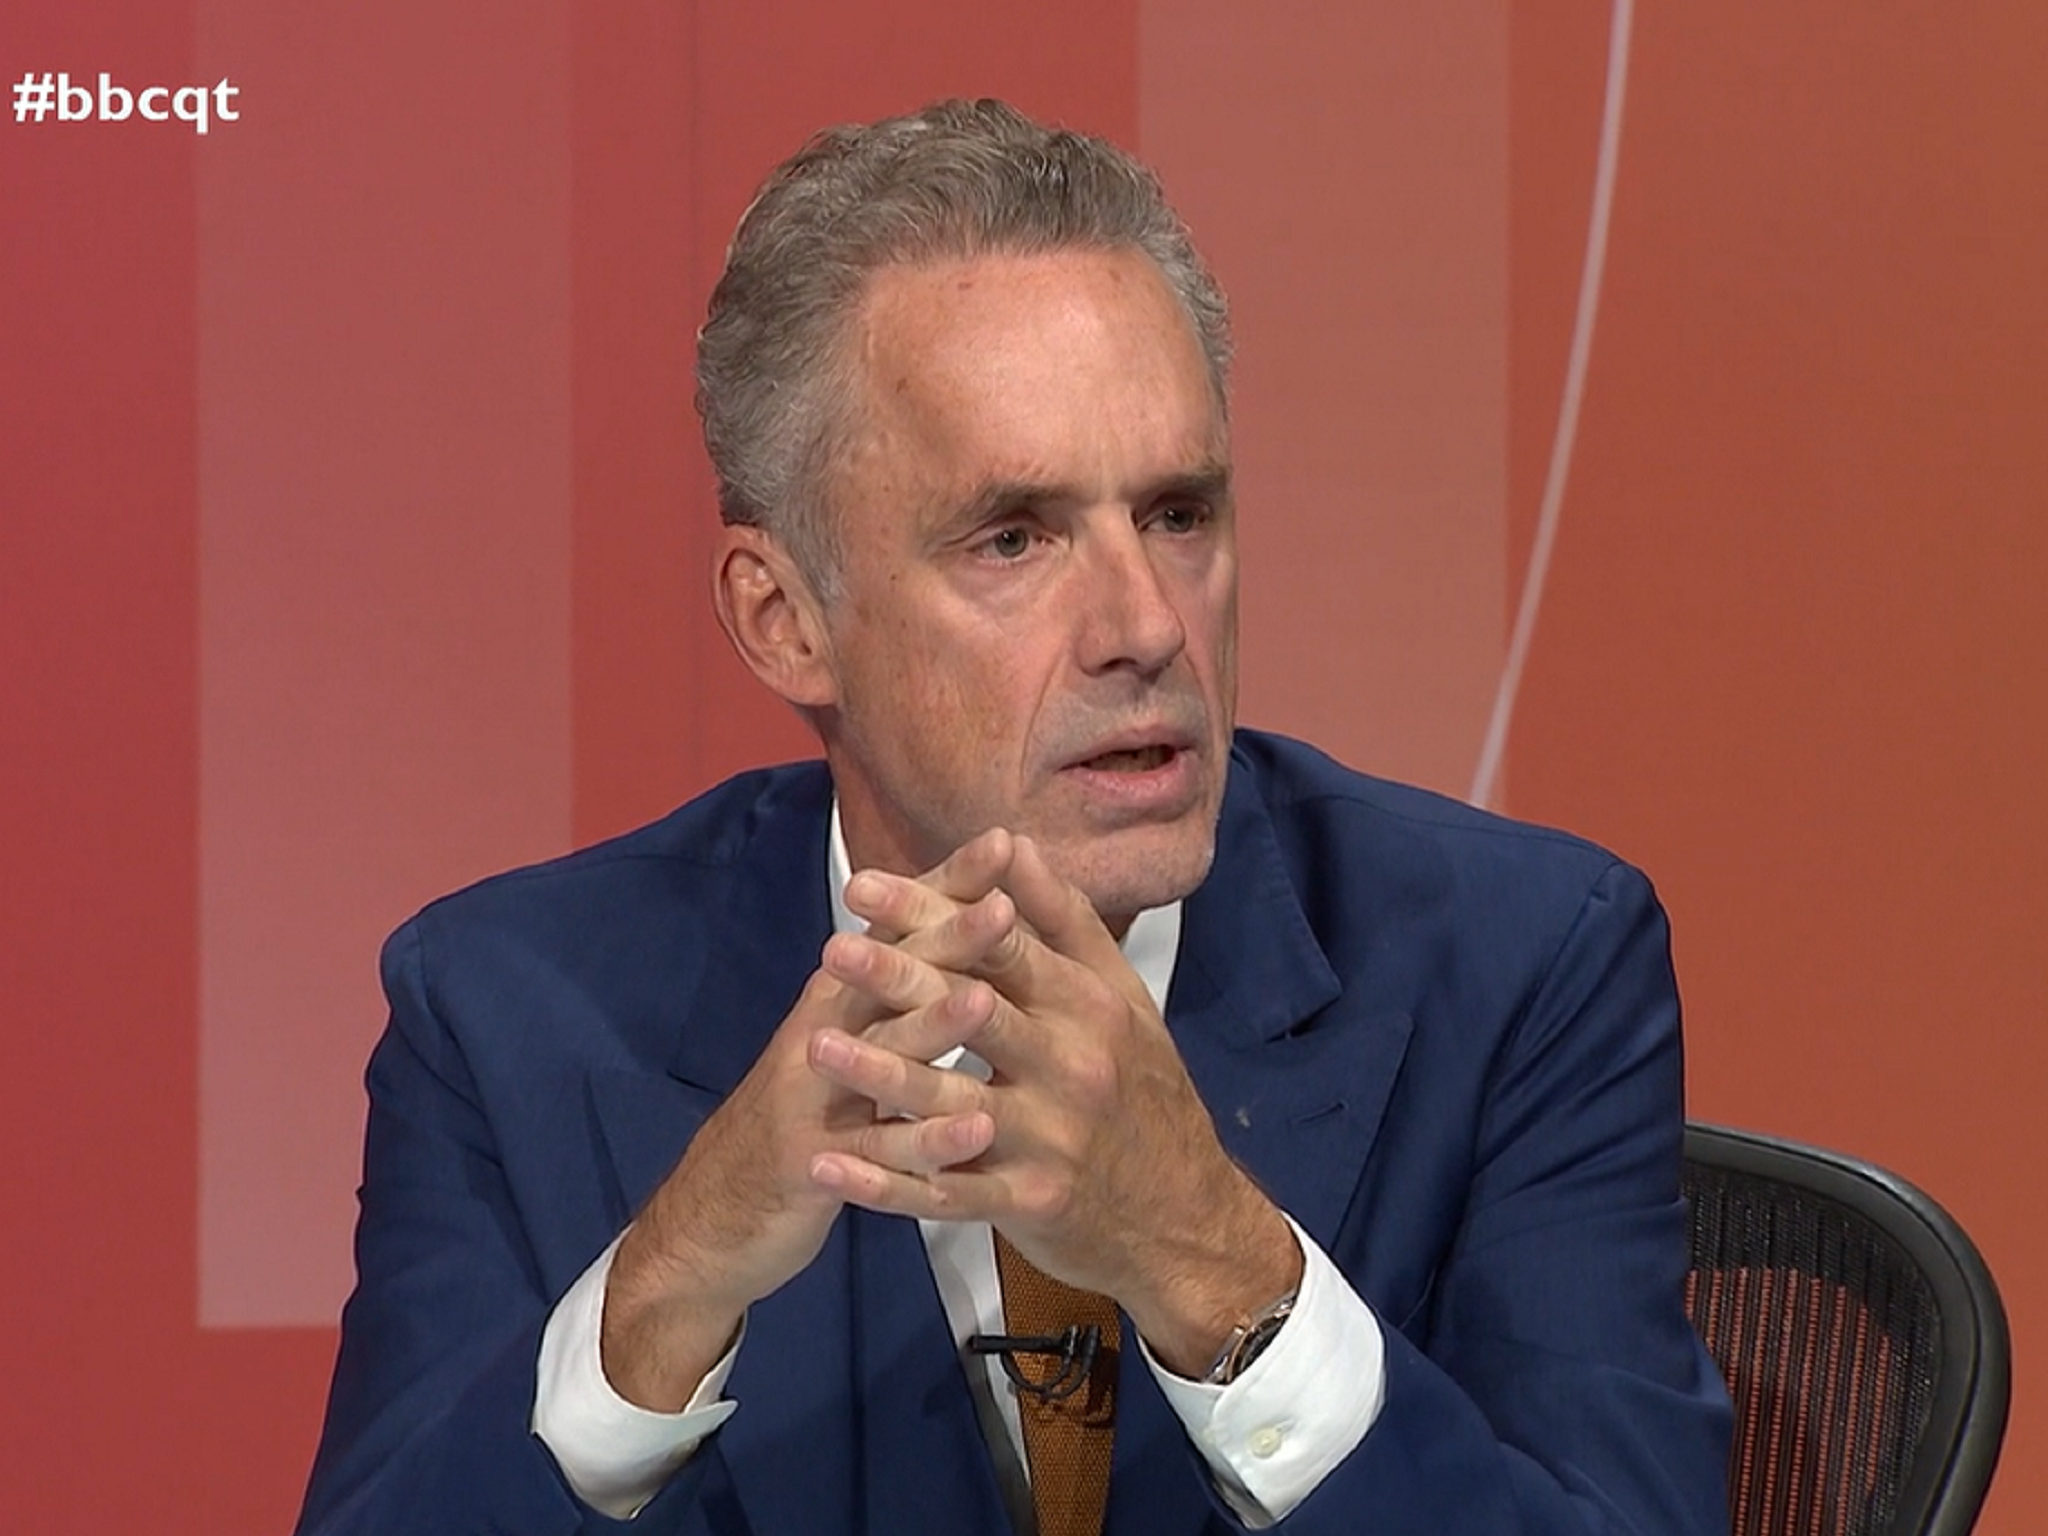 Peterson seems to believe that his own authority to comment on women’s appearances should be tolerated